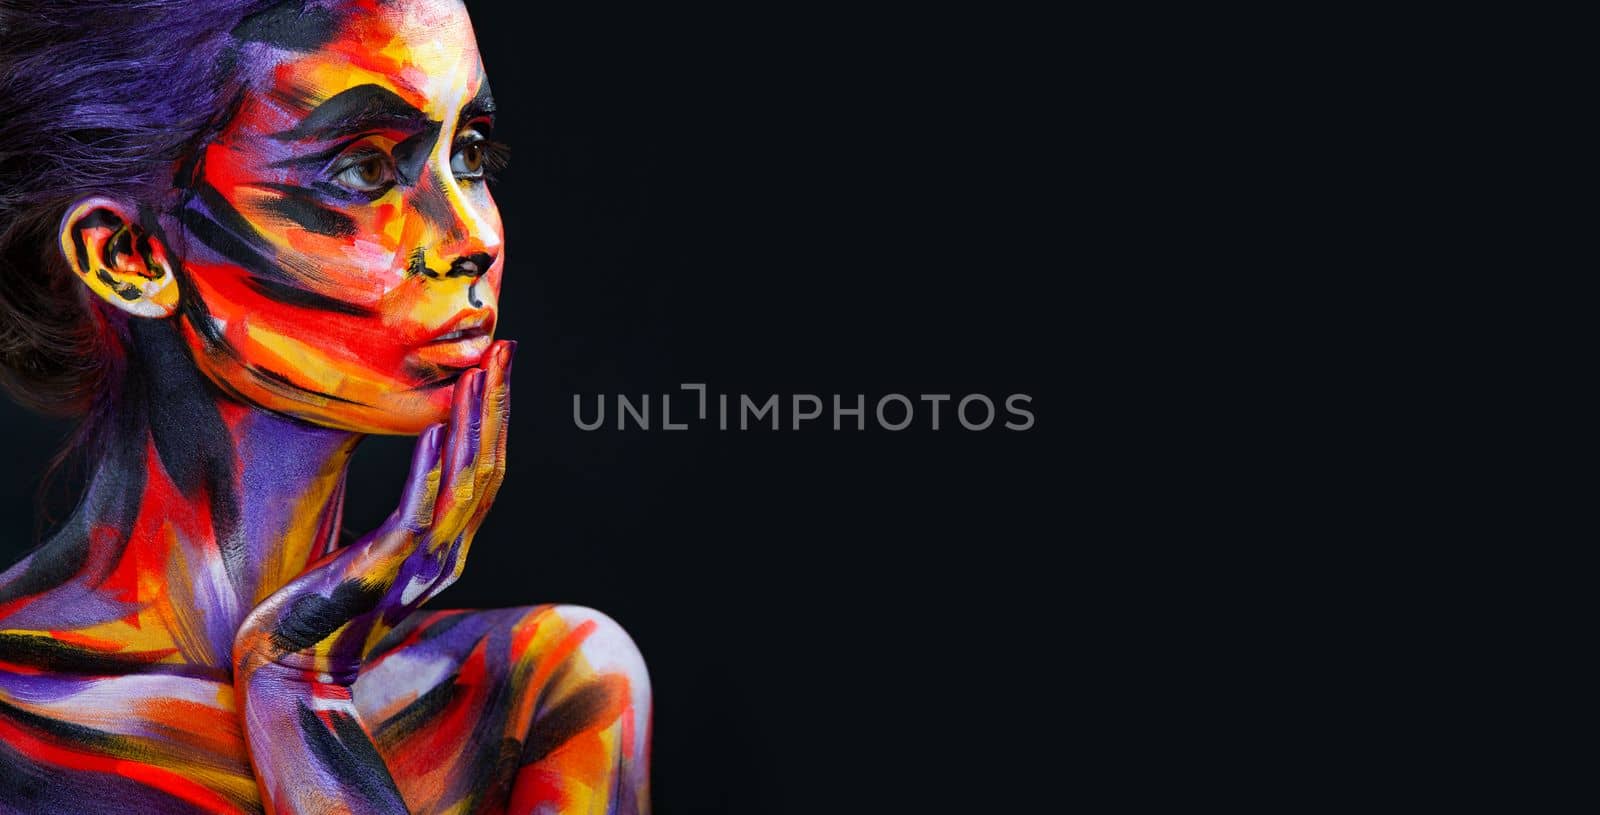 Portrait of the beautiful girl with art colorful make-up and bodyart. Download a picture with free space for text. Mockup for a music album. Cover design for e-book. Abstract image.